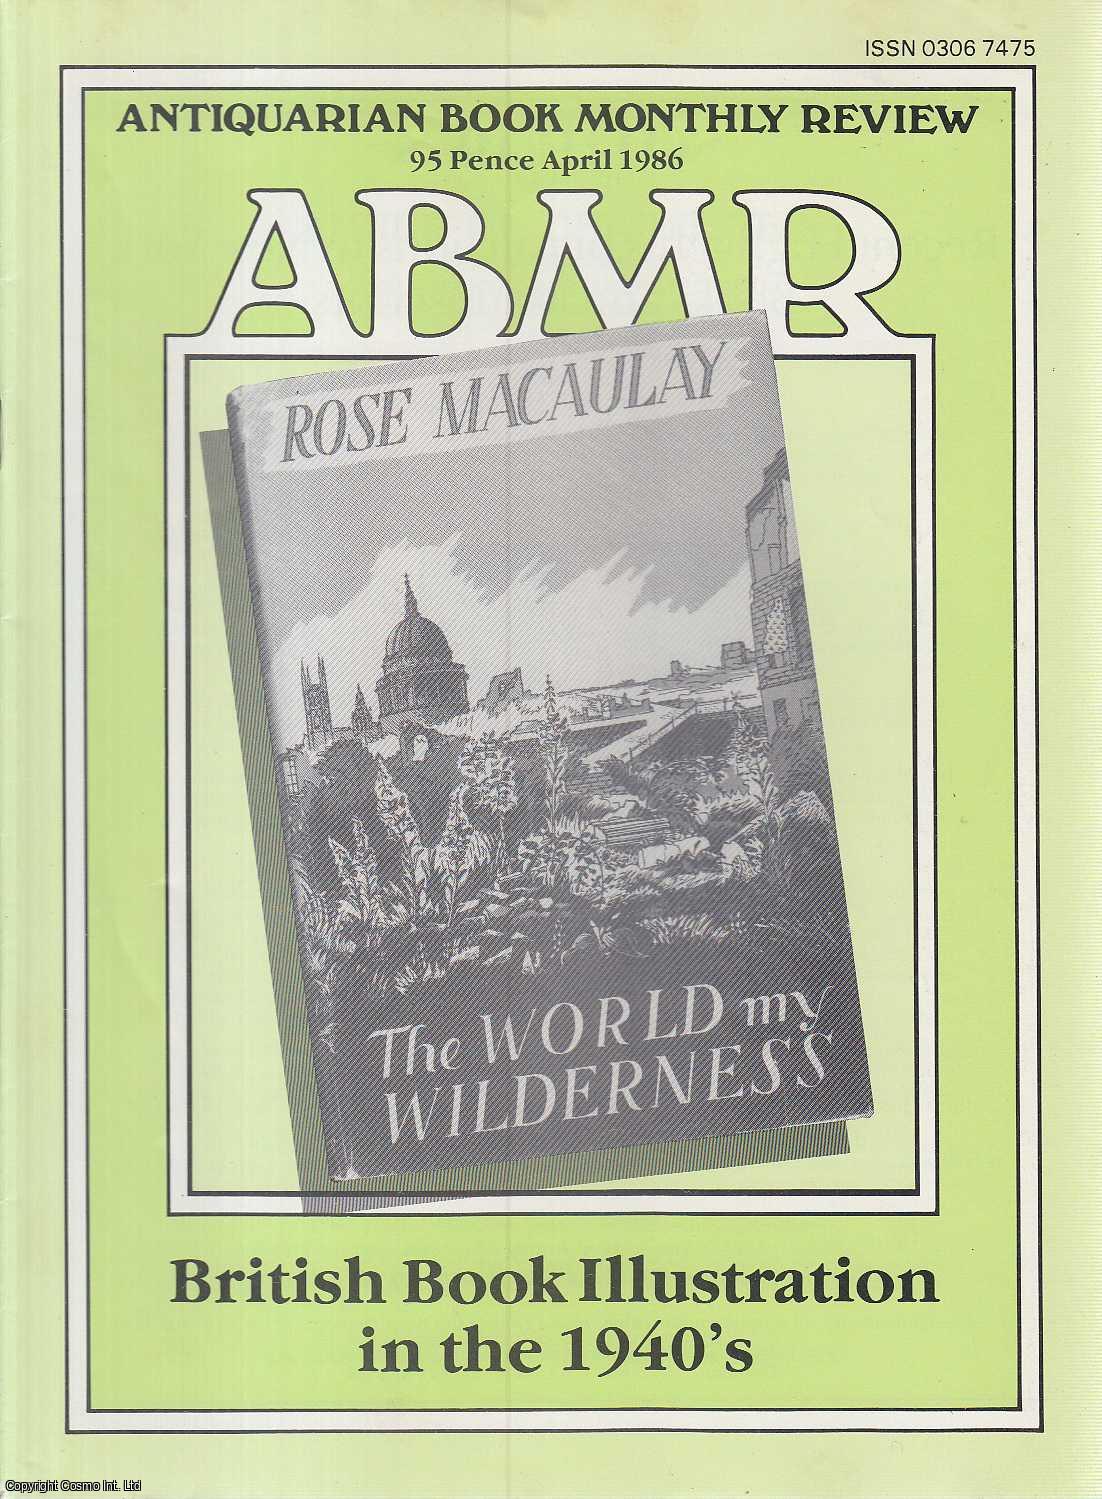 Richard Dalby - Richard Marsh and 'The Beetle', unappreciated author. An original article contained in a complete monthly issue of the Antiquarian Book Monthly Review, 1986.